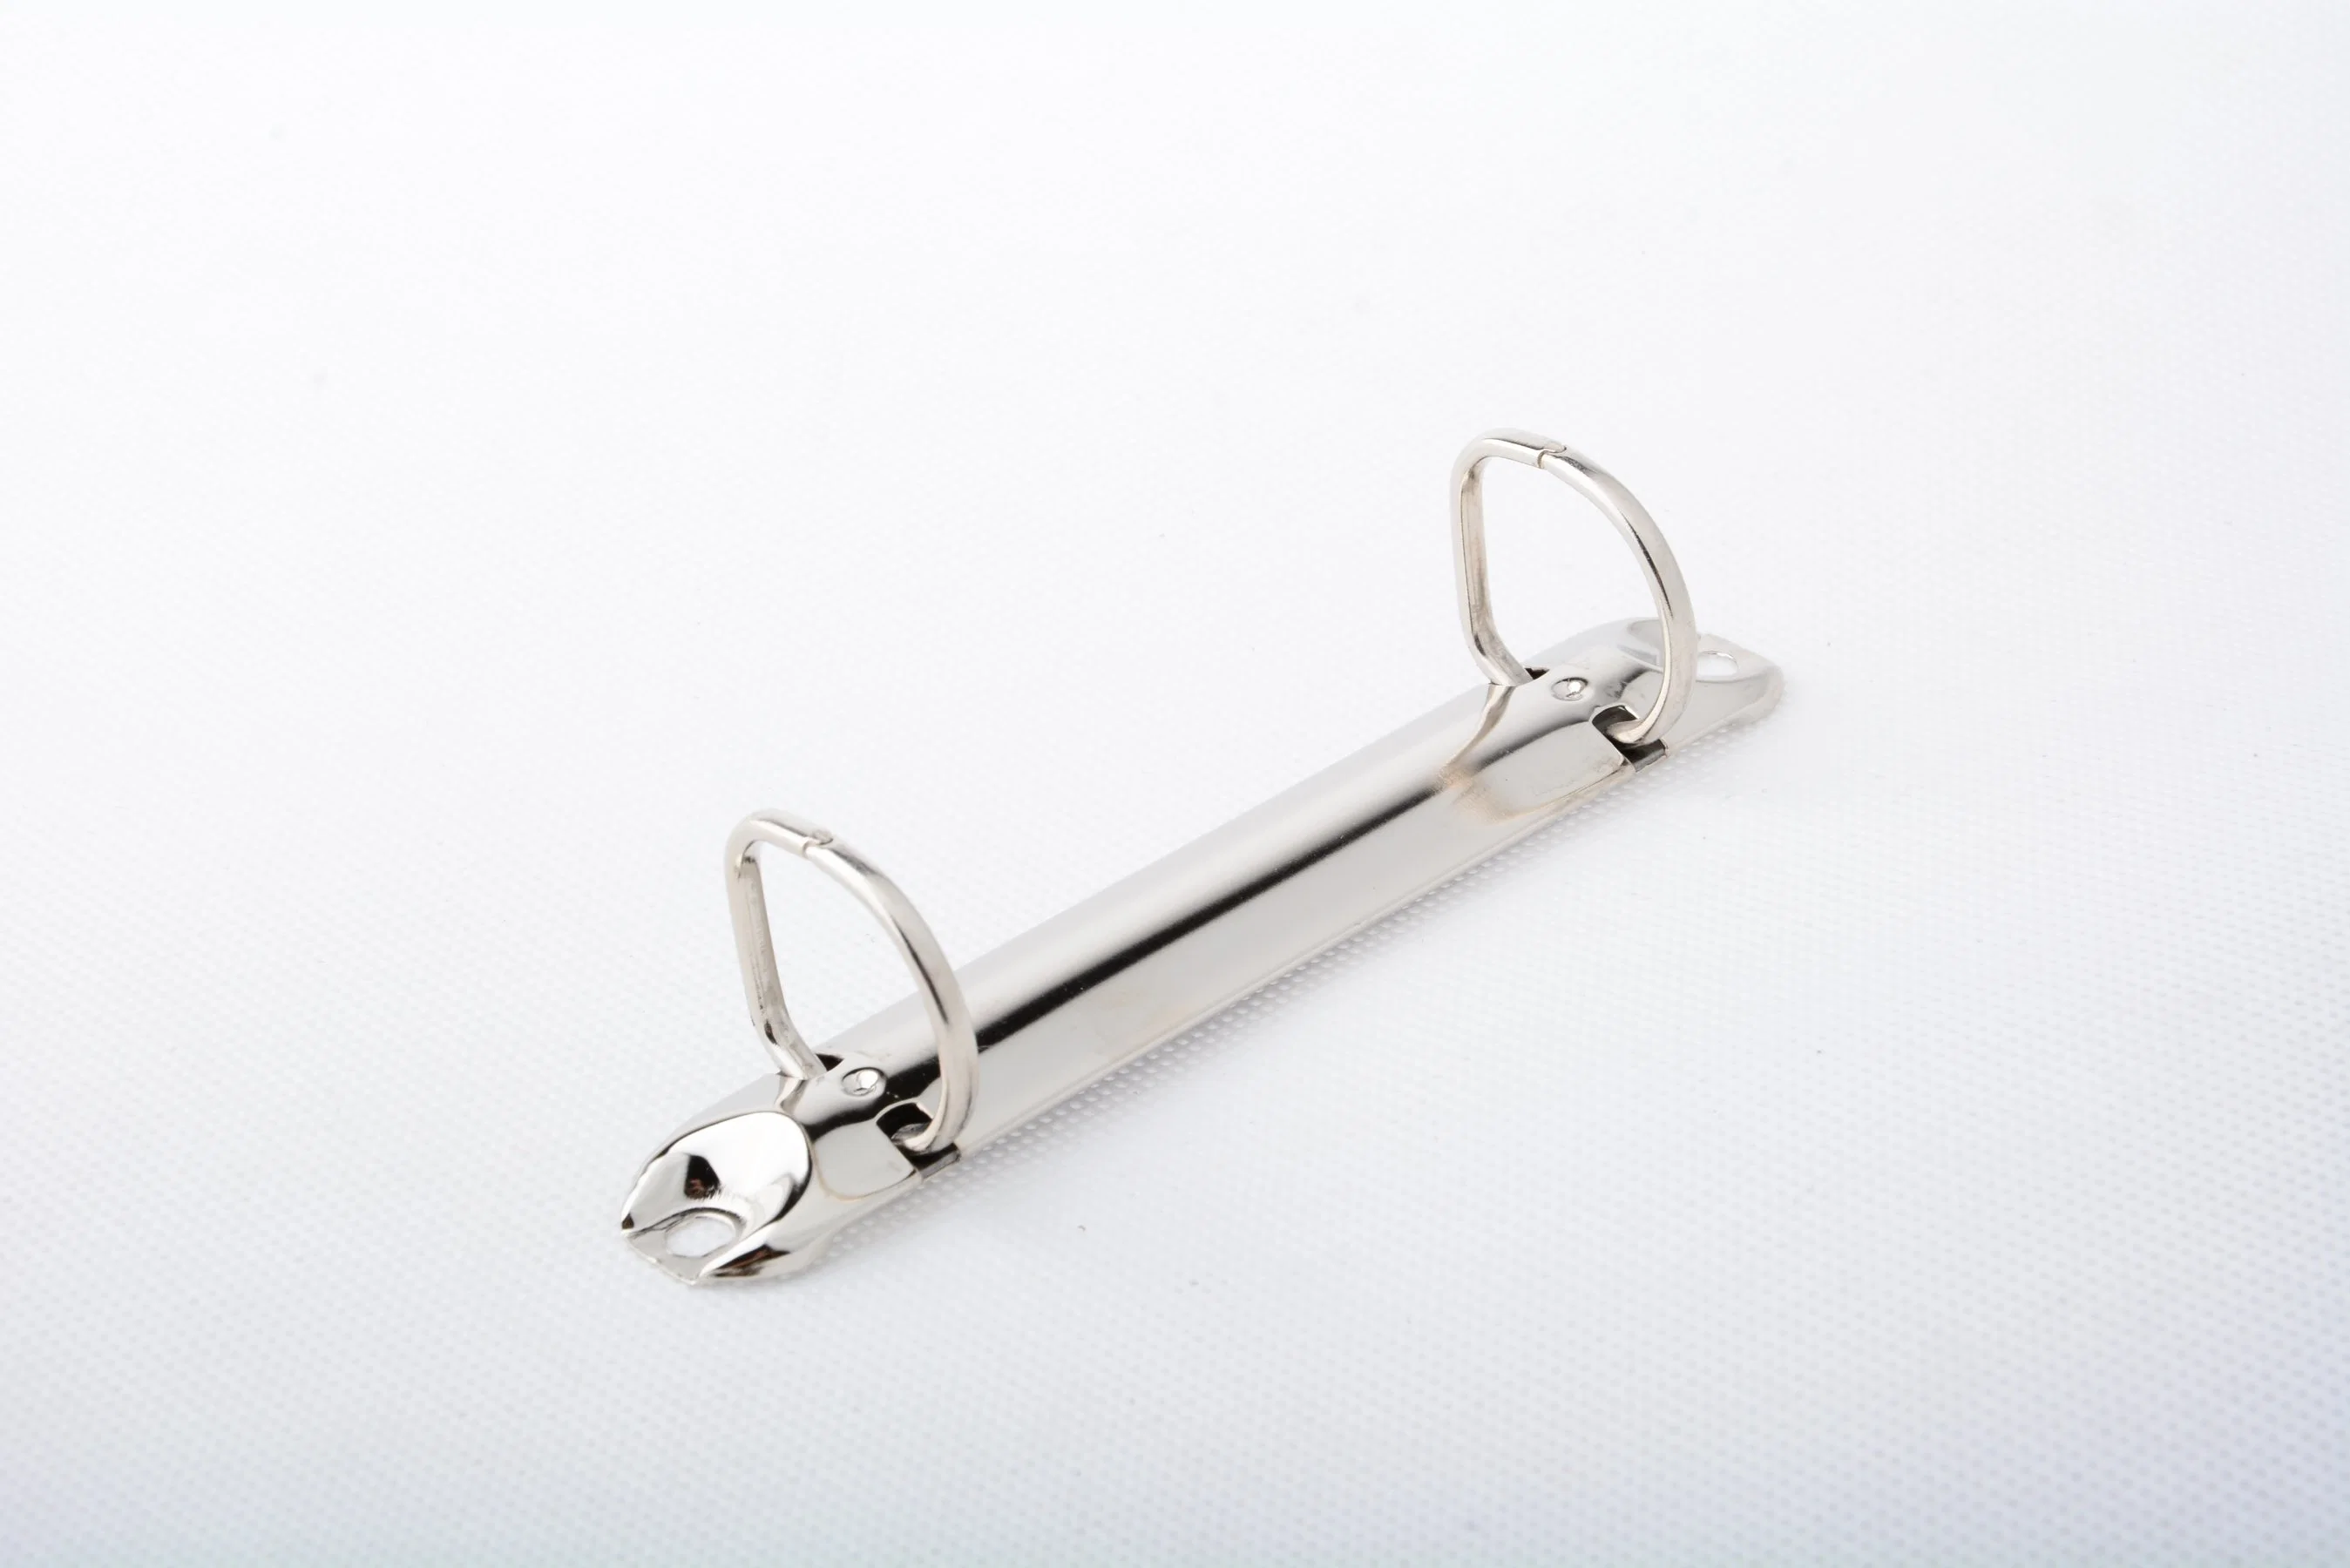 2 Ring Mechanism for Notebook Best Selling 2 Ring Binder Clip in Market